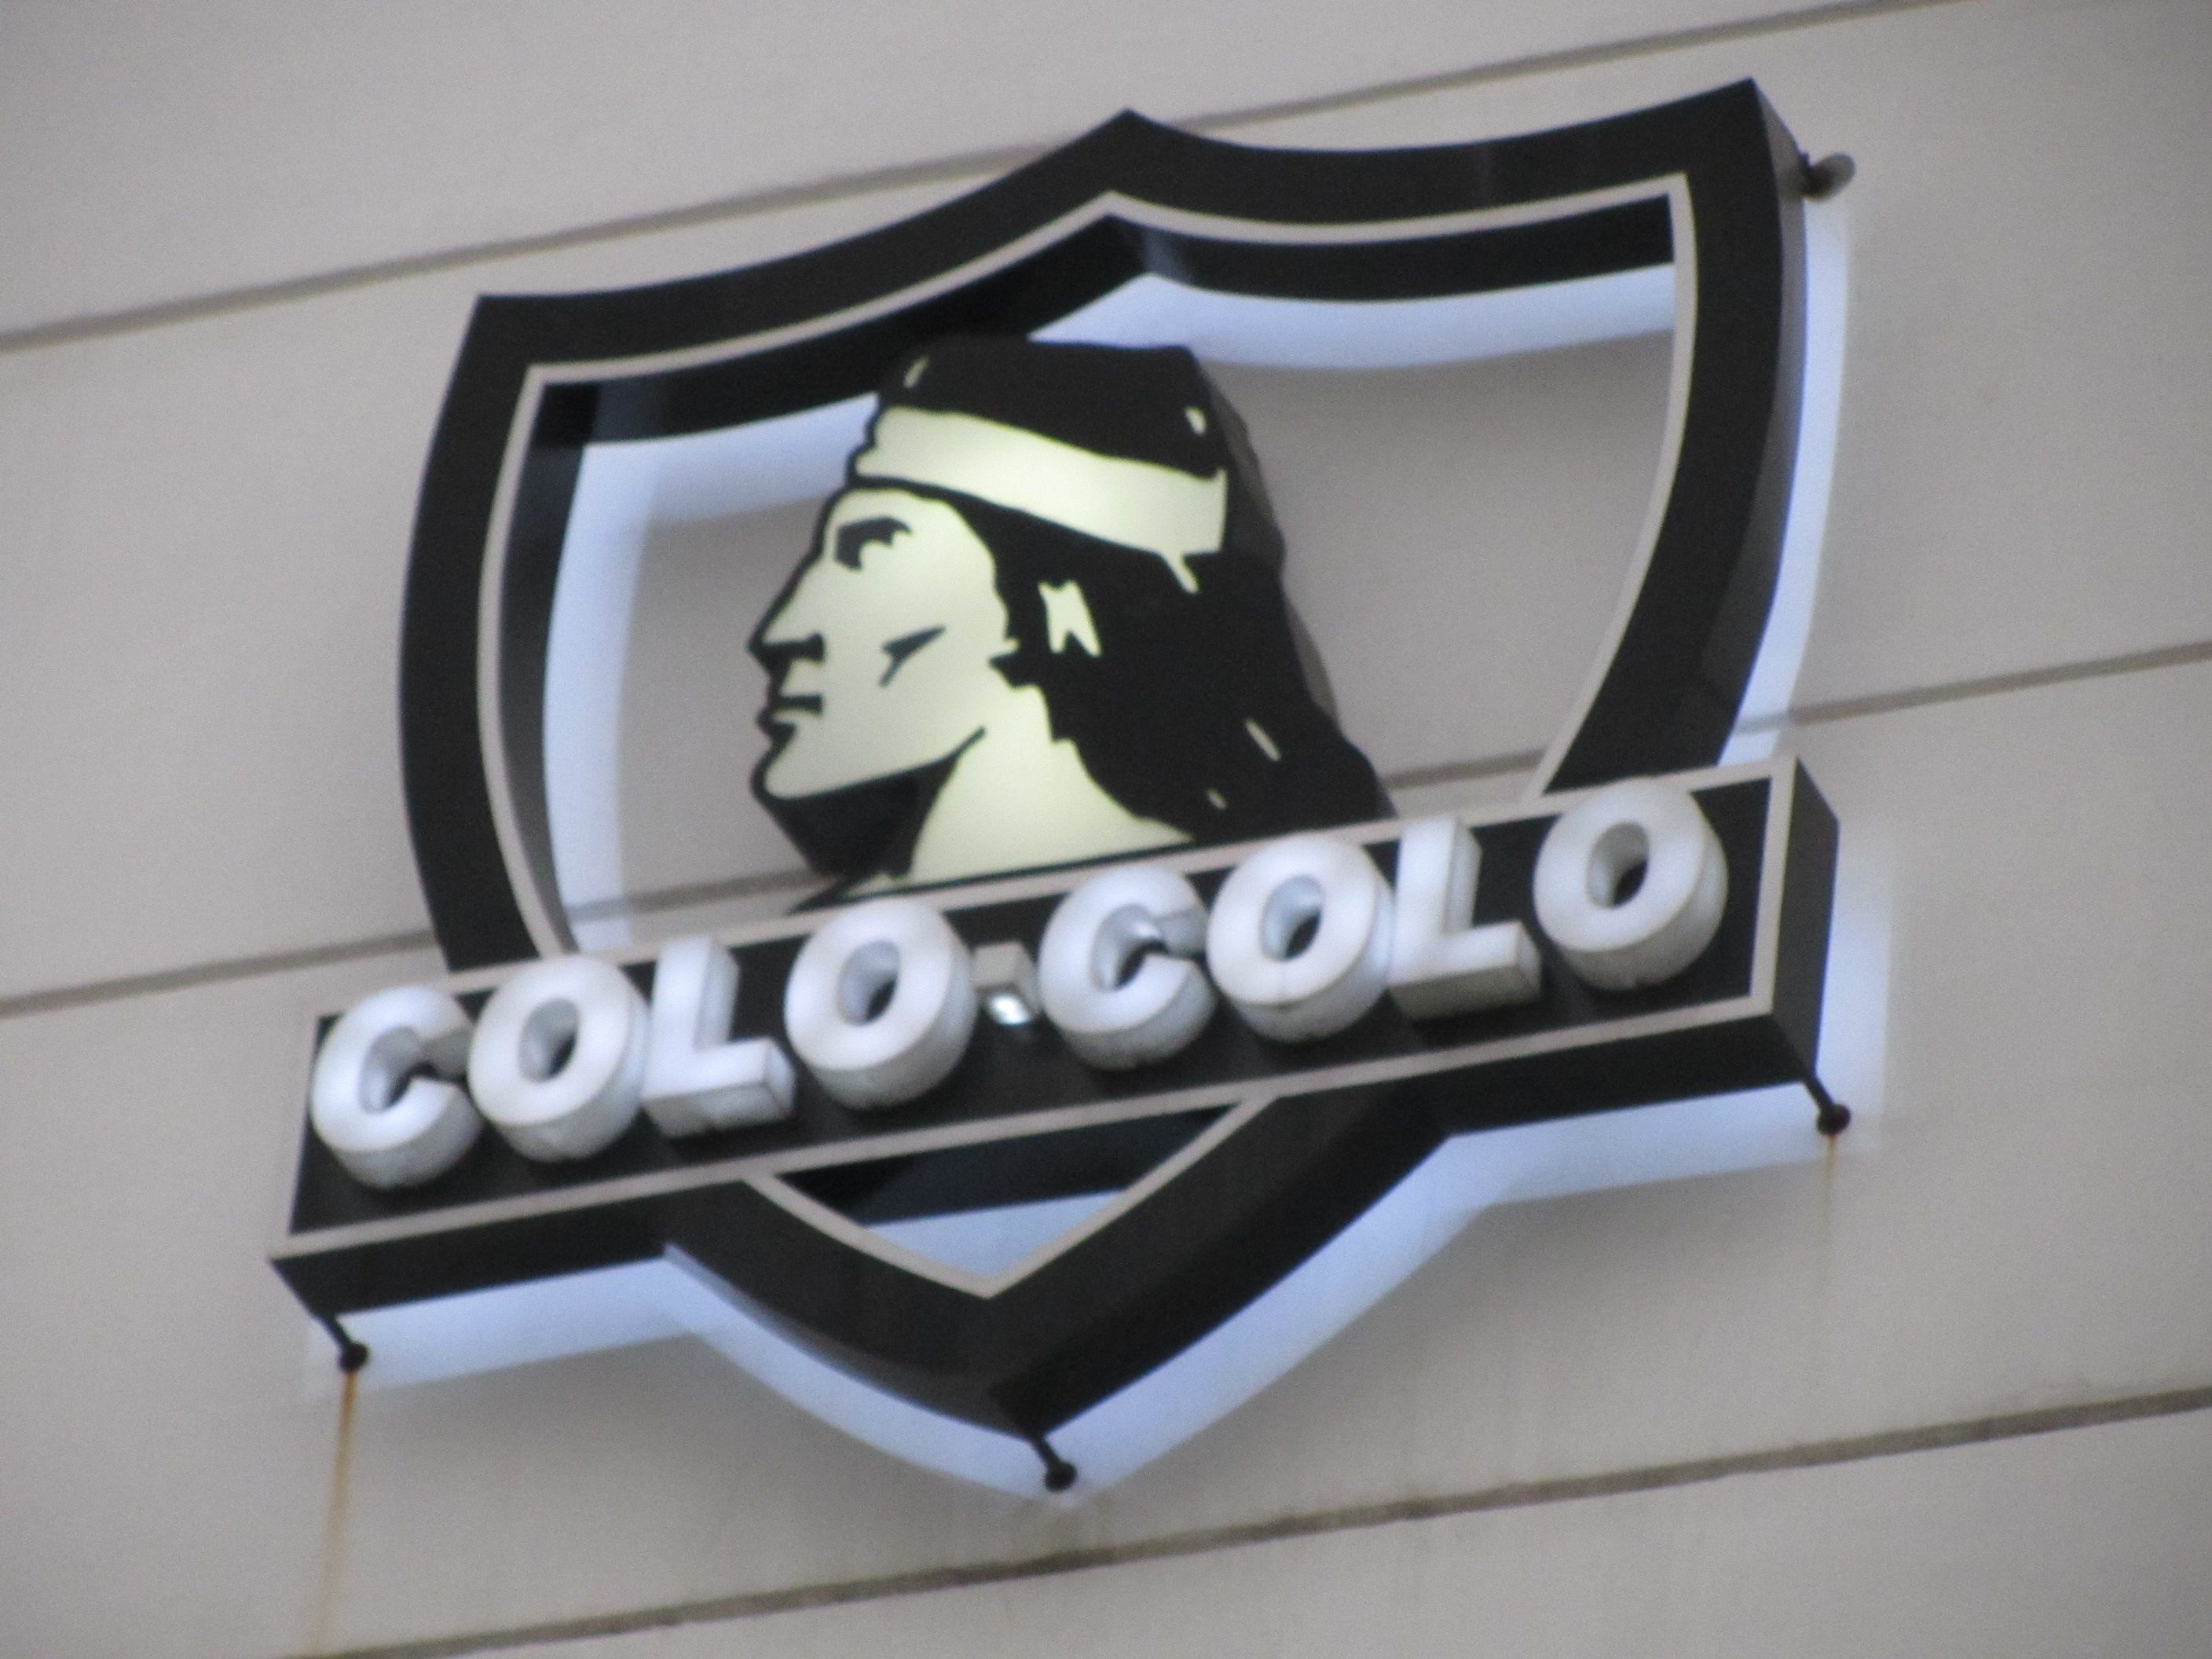 Colo-Colo Copyright: © linked.in